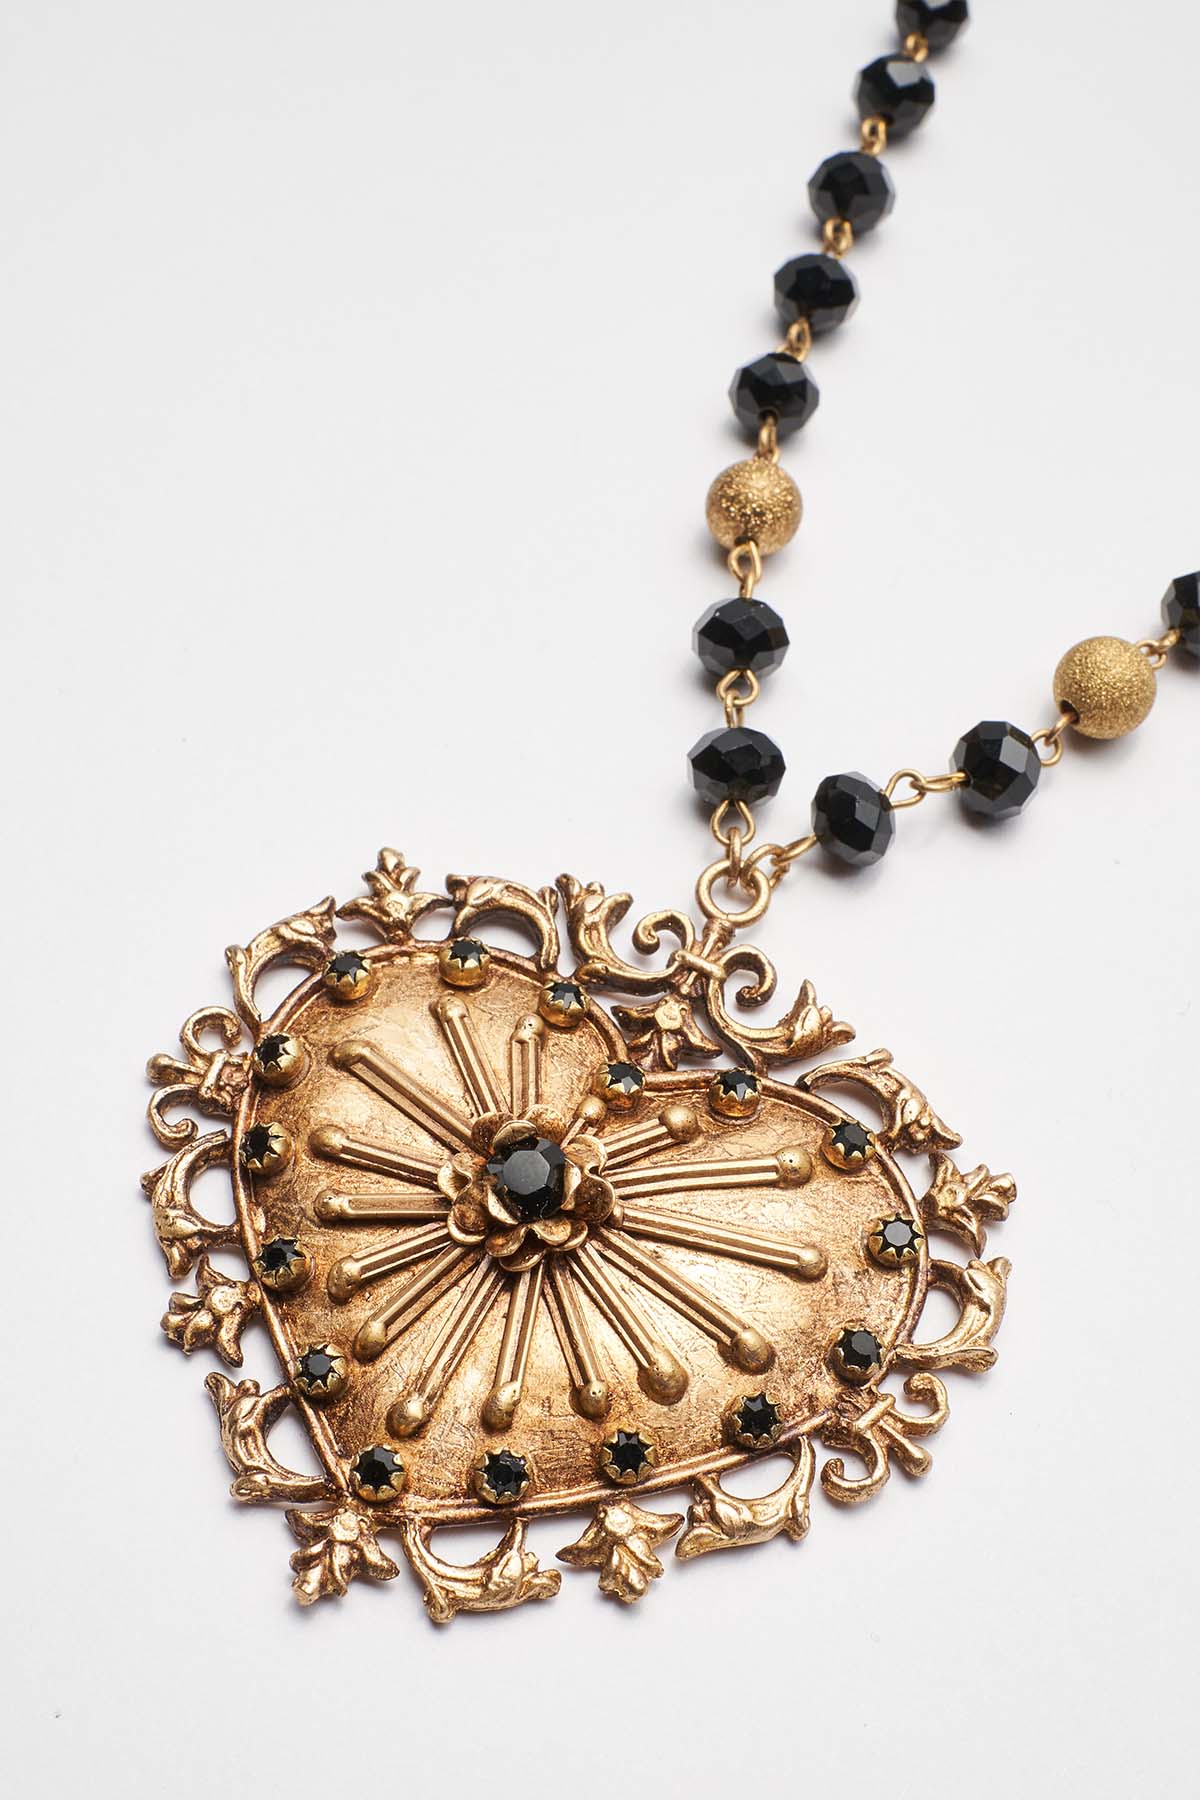 CORAZON SAGRADO NECKLACE WITH BEADS AND CRYSTALS